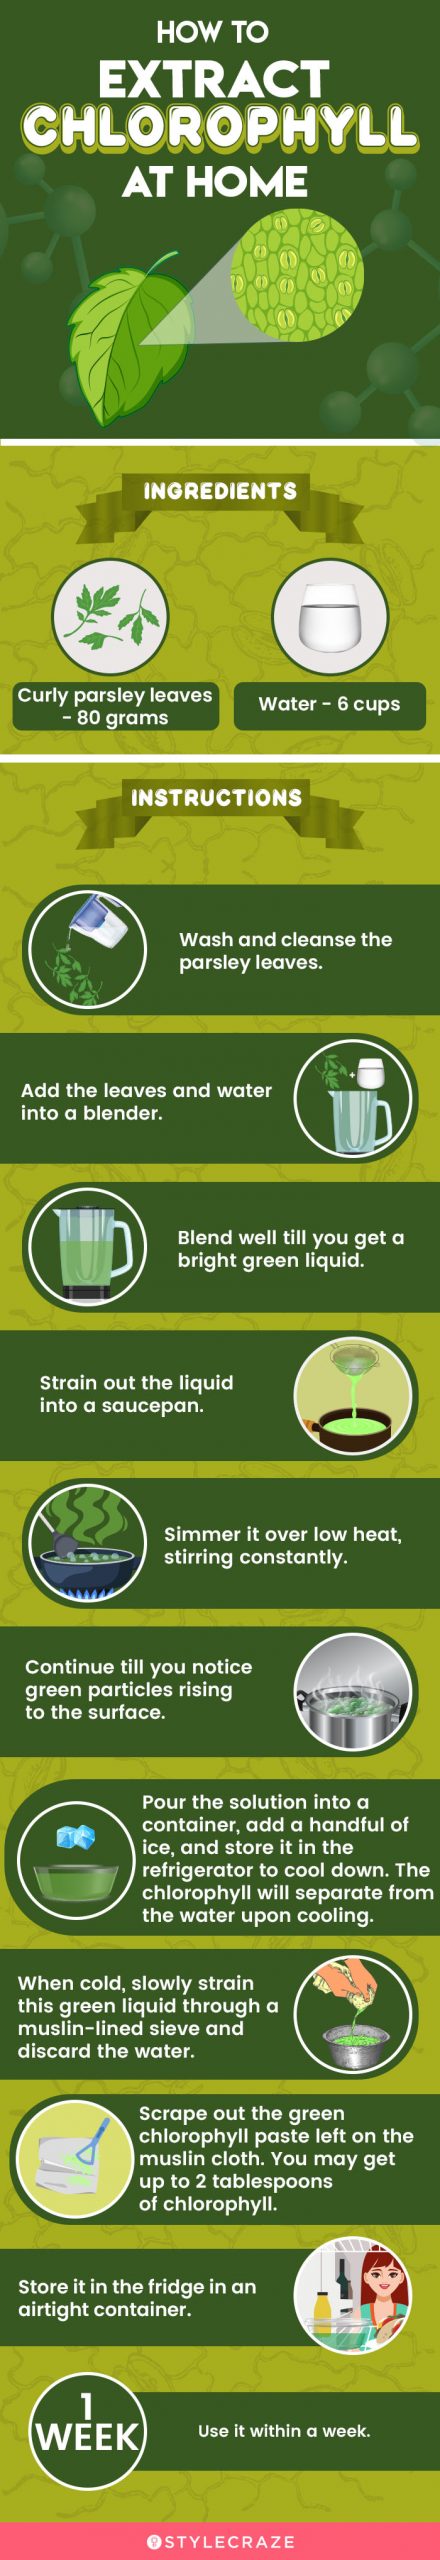 how to extract chlorophyll at home (infographic)